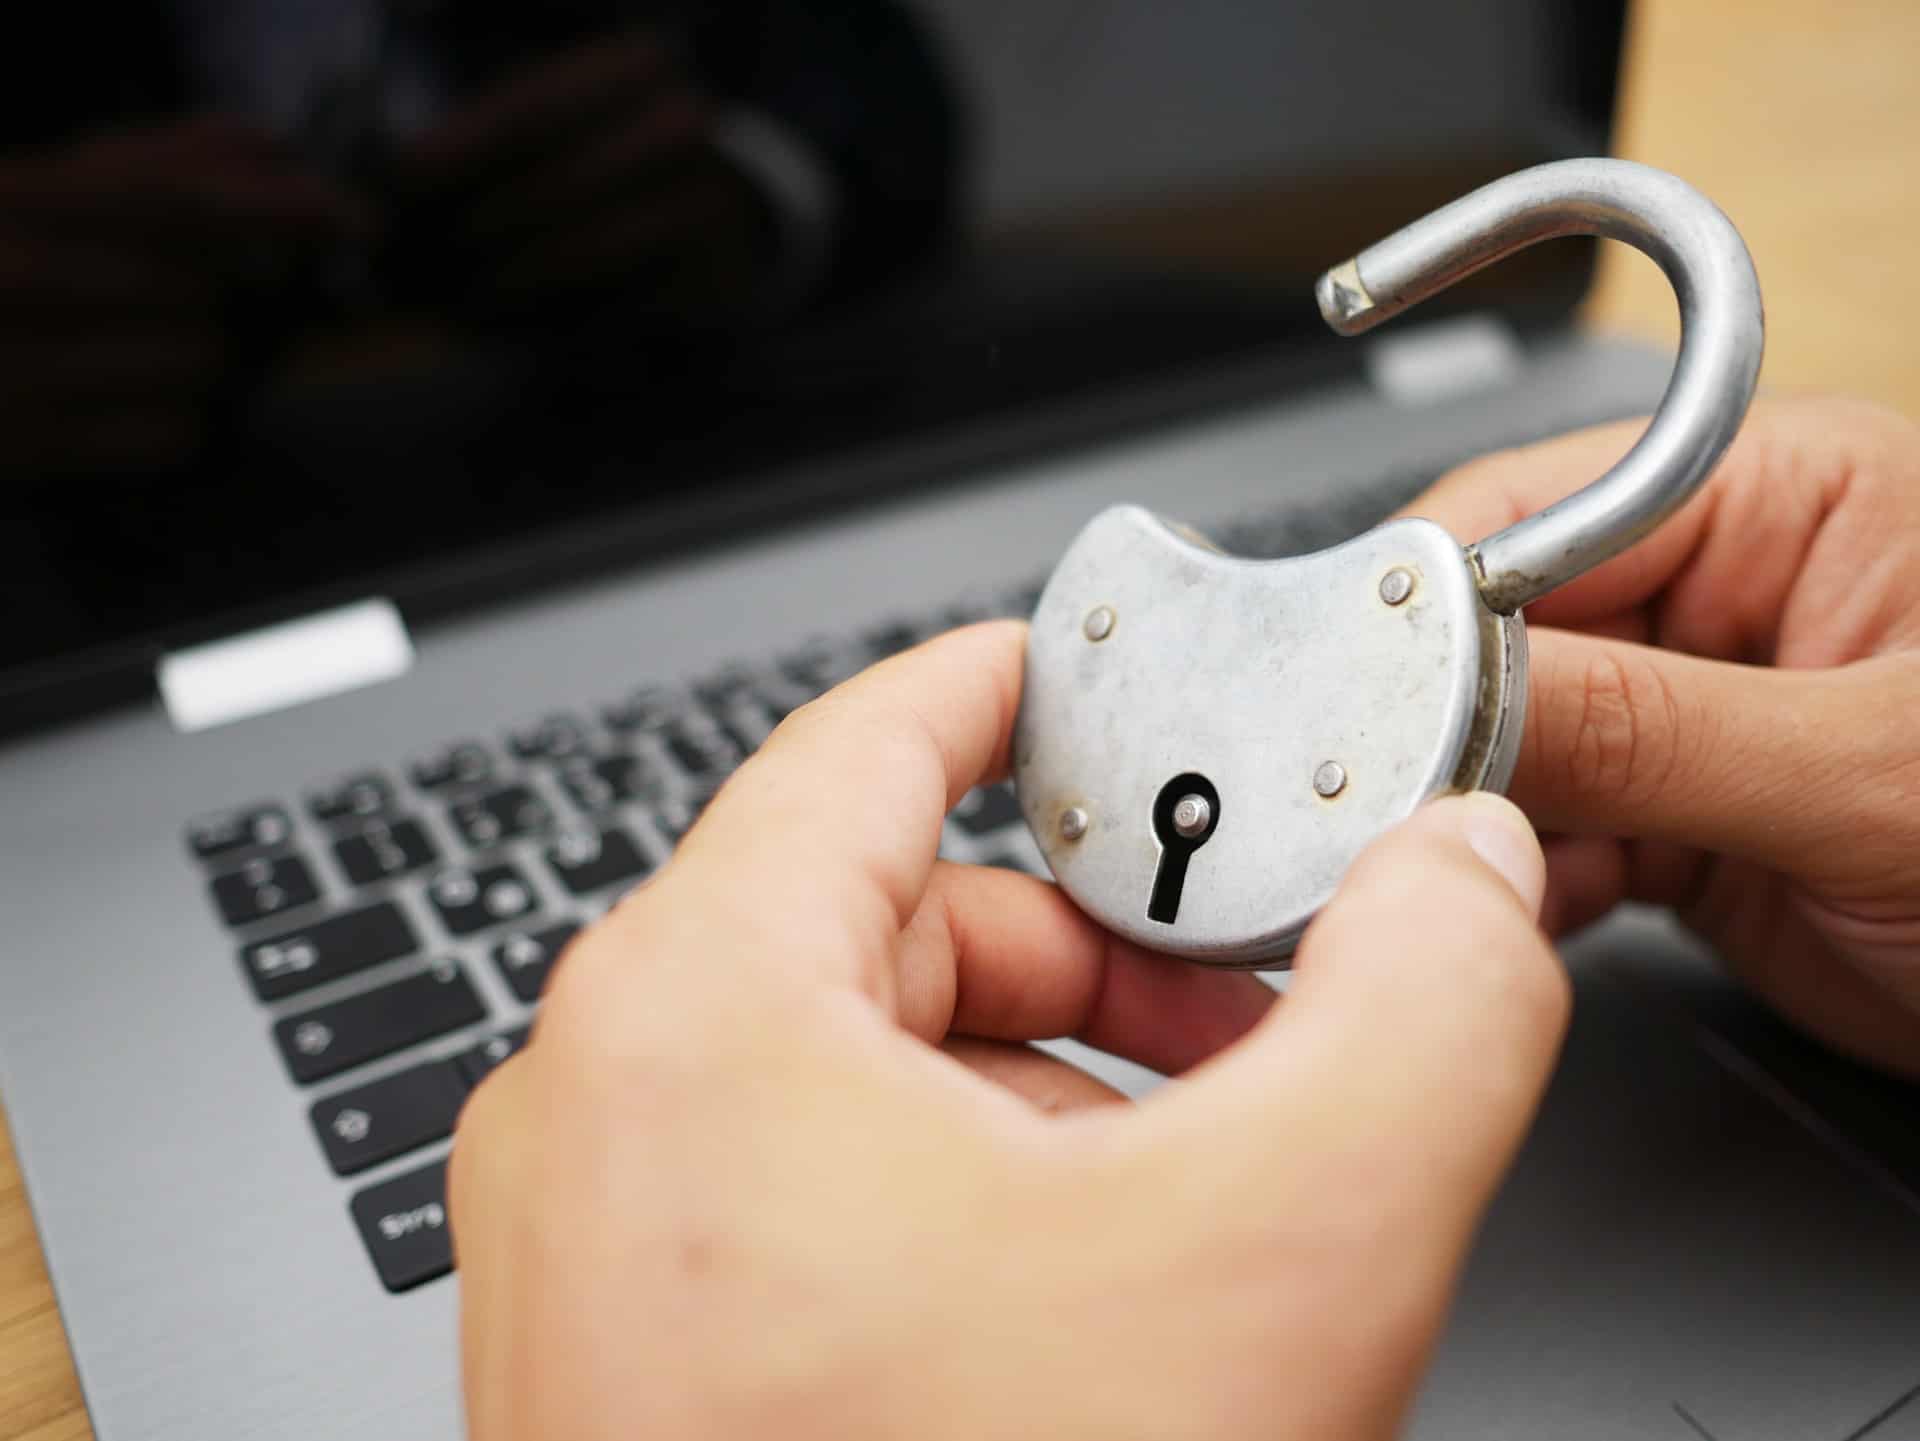 Padlock held over a laptop.